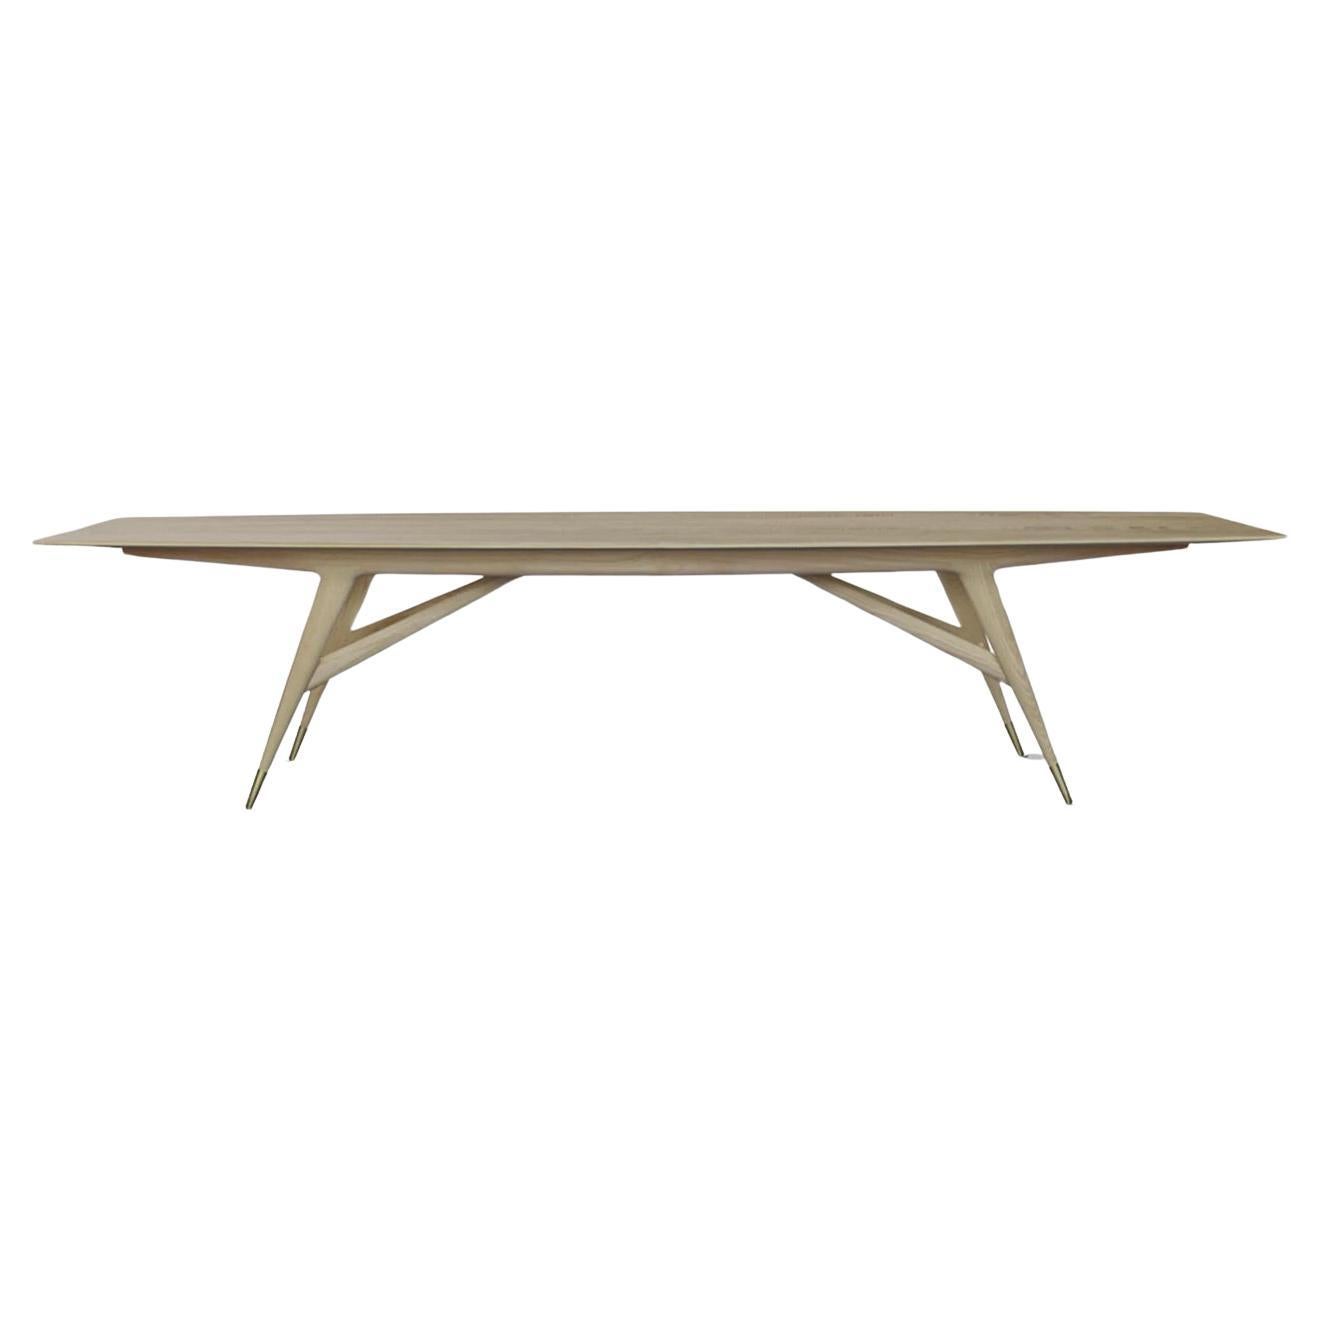 Molteni&C D.859.1 Ash Wood Dining Table by Gio Ponti 